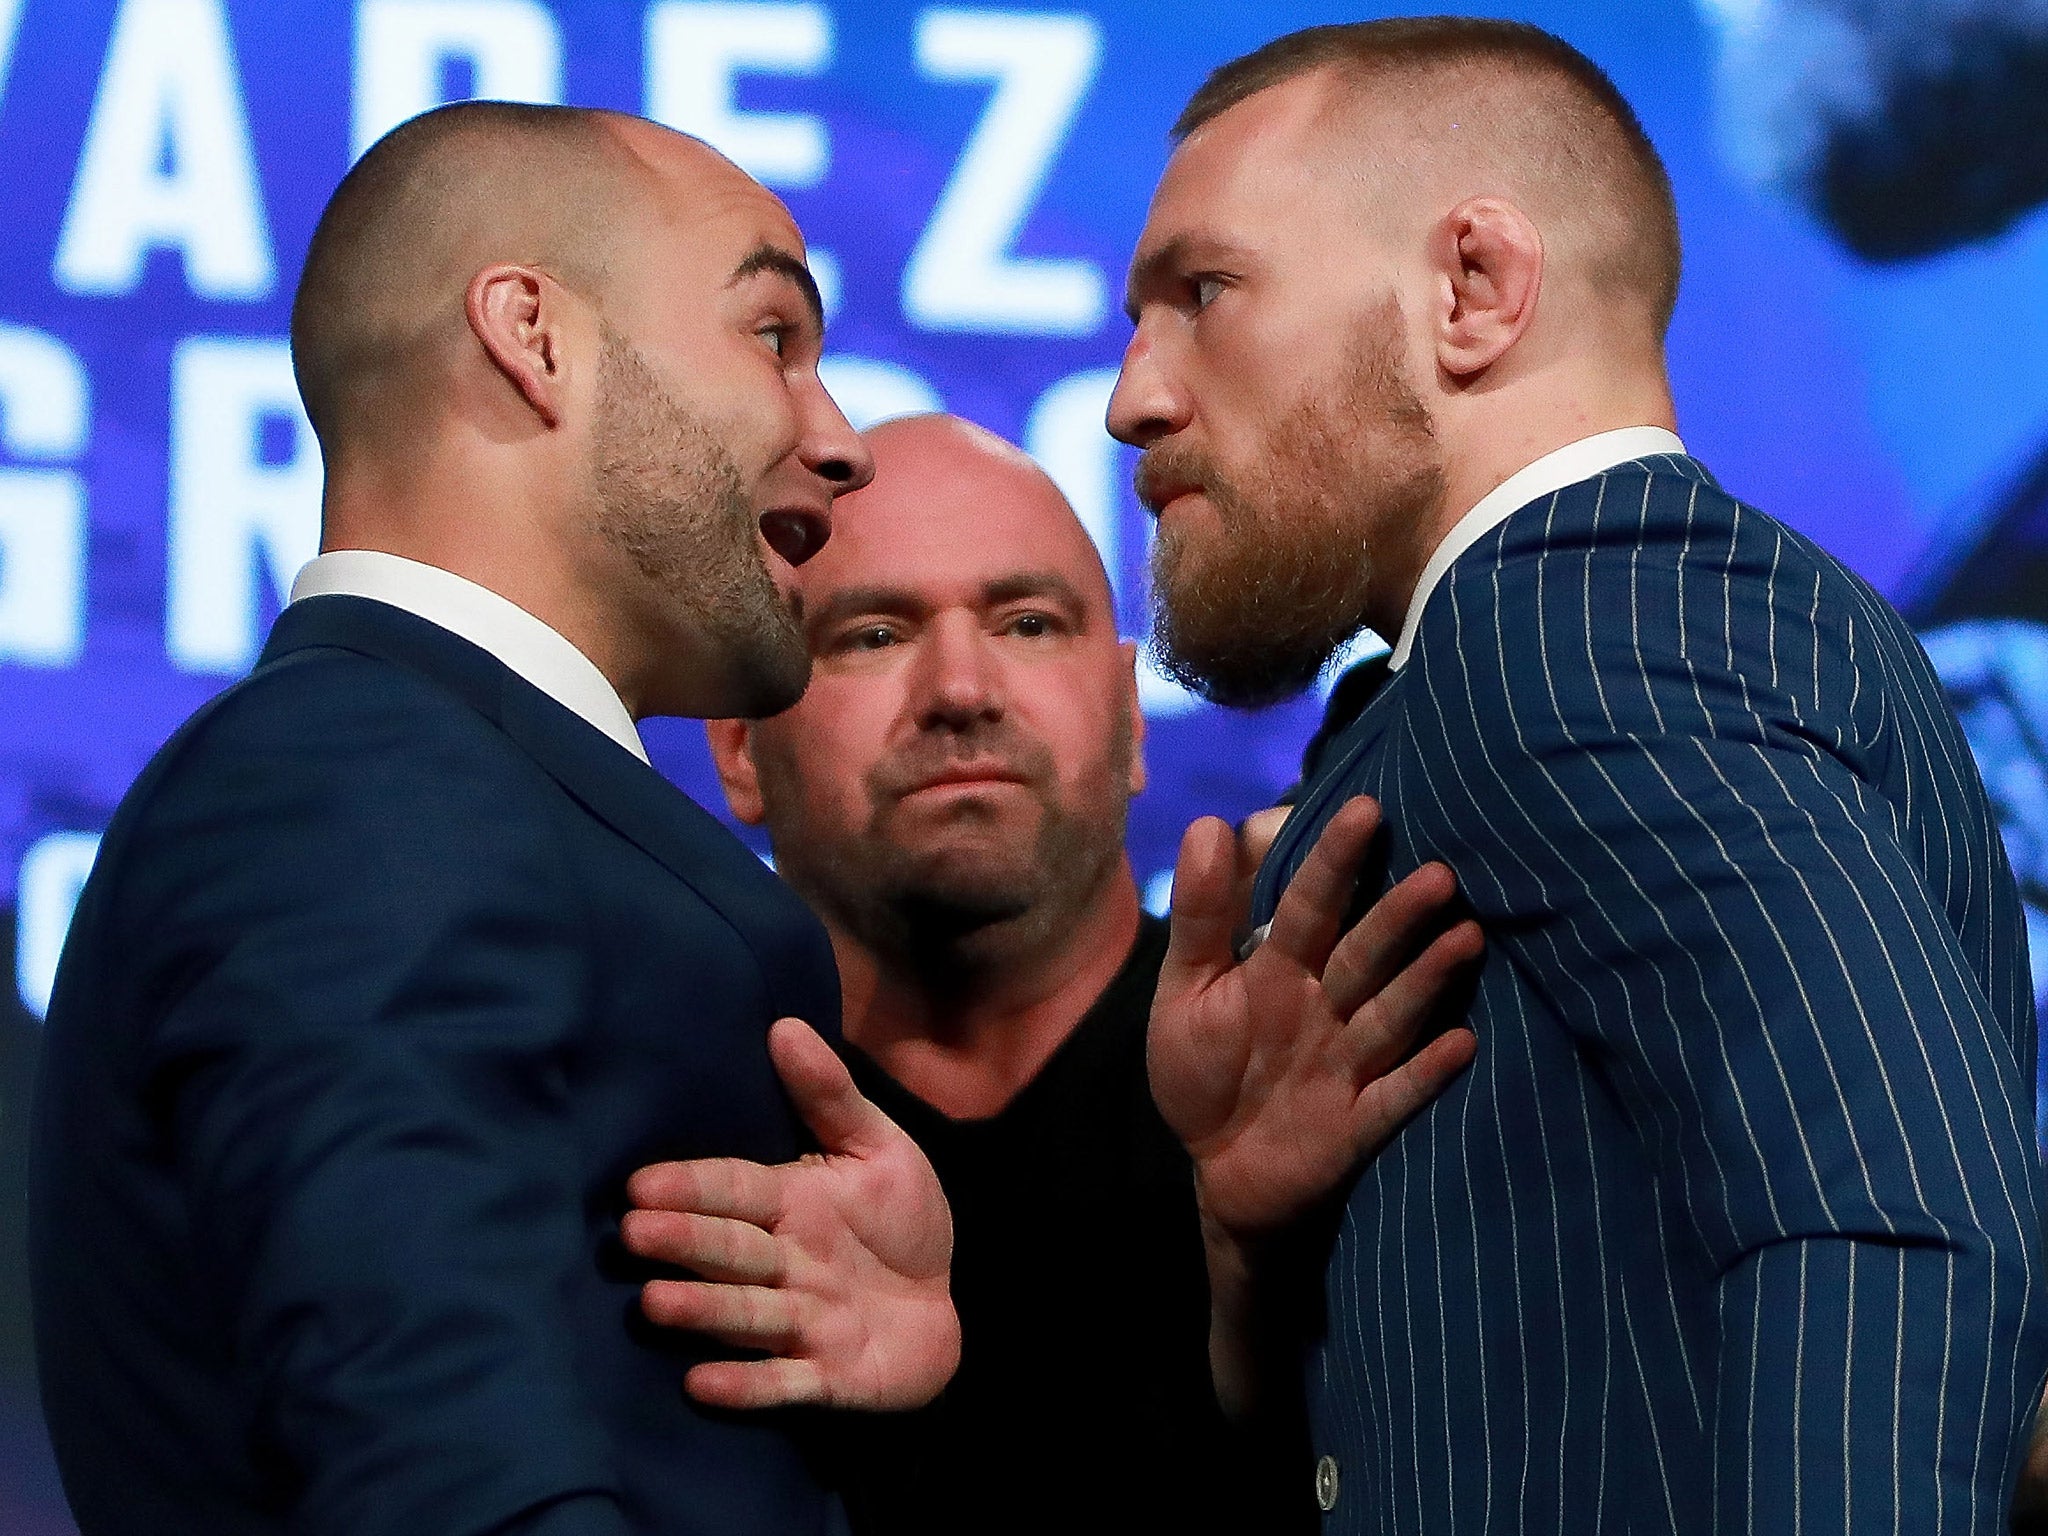 Alvarez and McGregor came face-to-face for the first time since their UFC 205 bout was confirmed